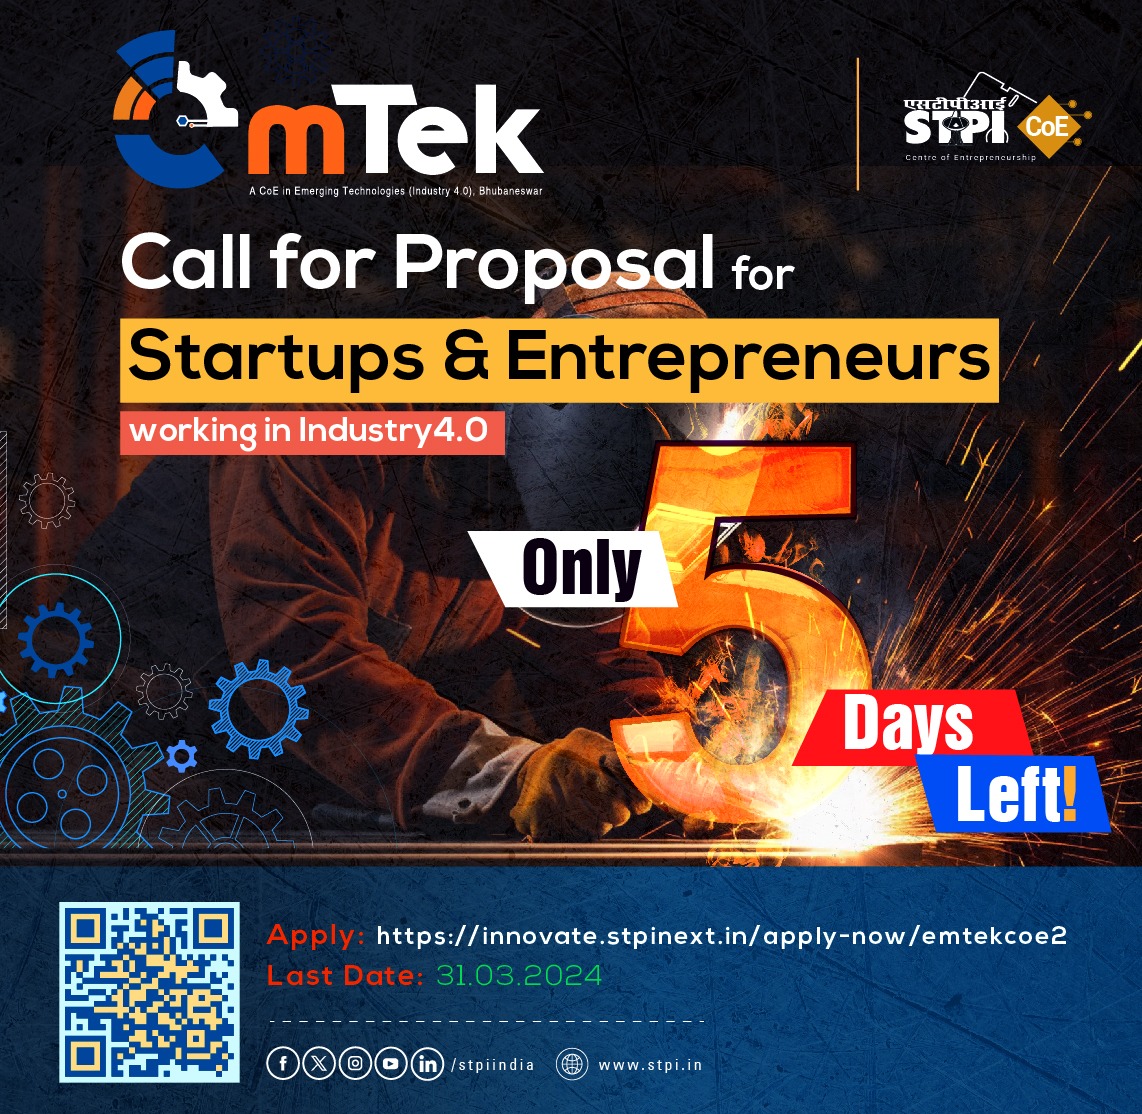 Only 5 days left!! Tech #startups, which are providing solutions at any stage for the industry using #Industry4.0 and emerging technologies, can participate in @emtekcoe's Call for Application. Apply Now: innovate.stpinext.in/apply-now/emte… Last Date: 31.03.2024.